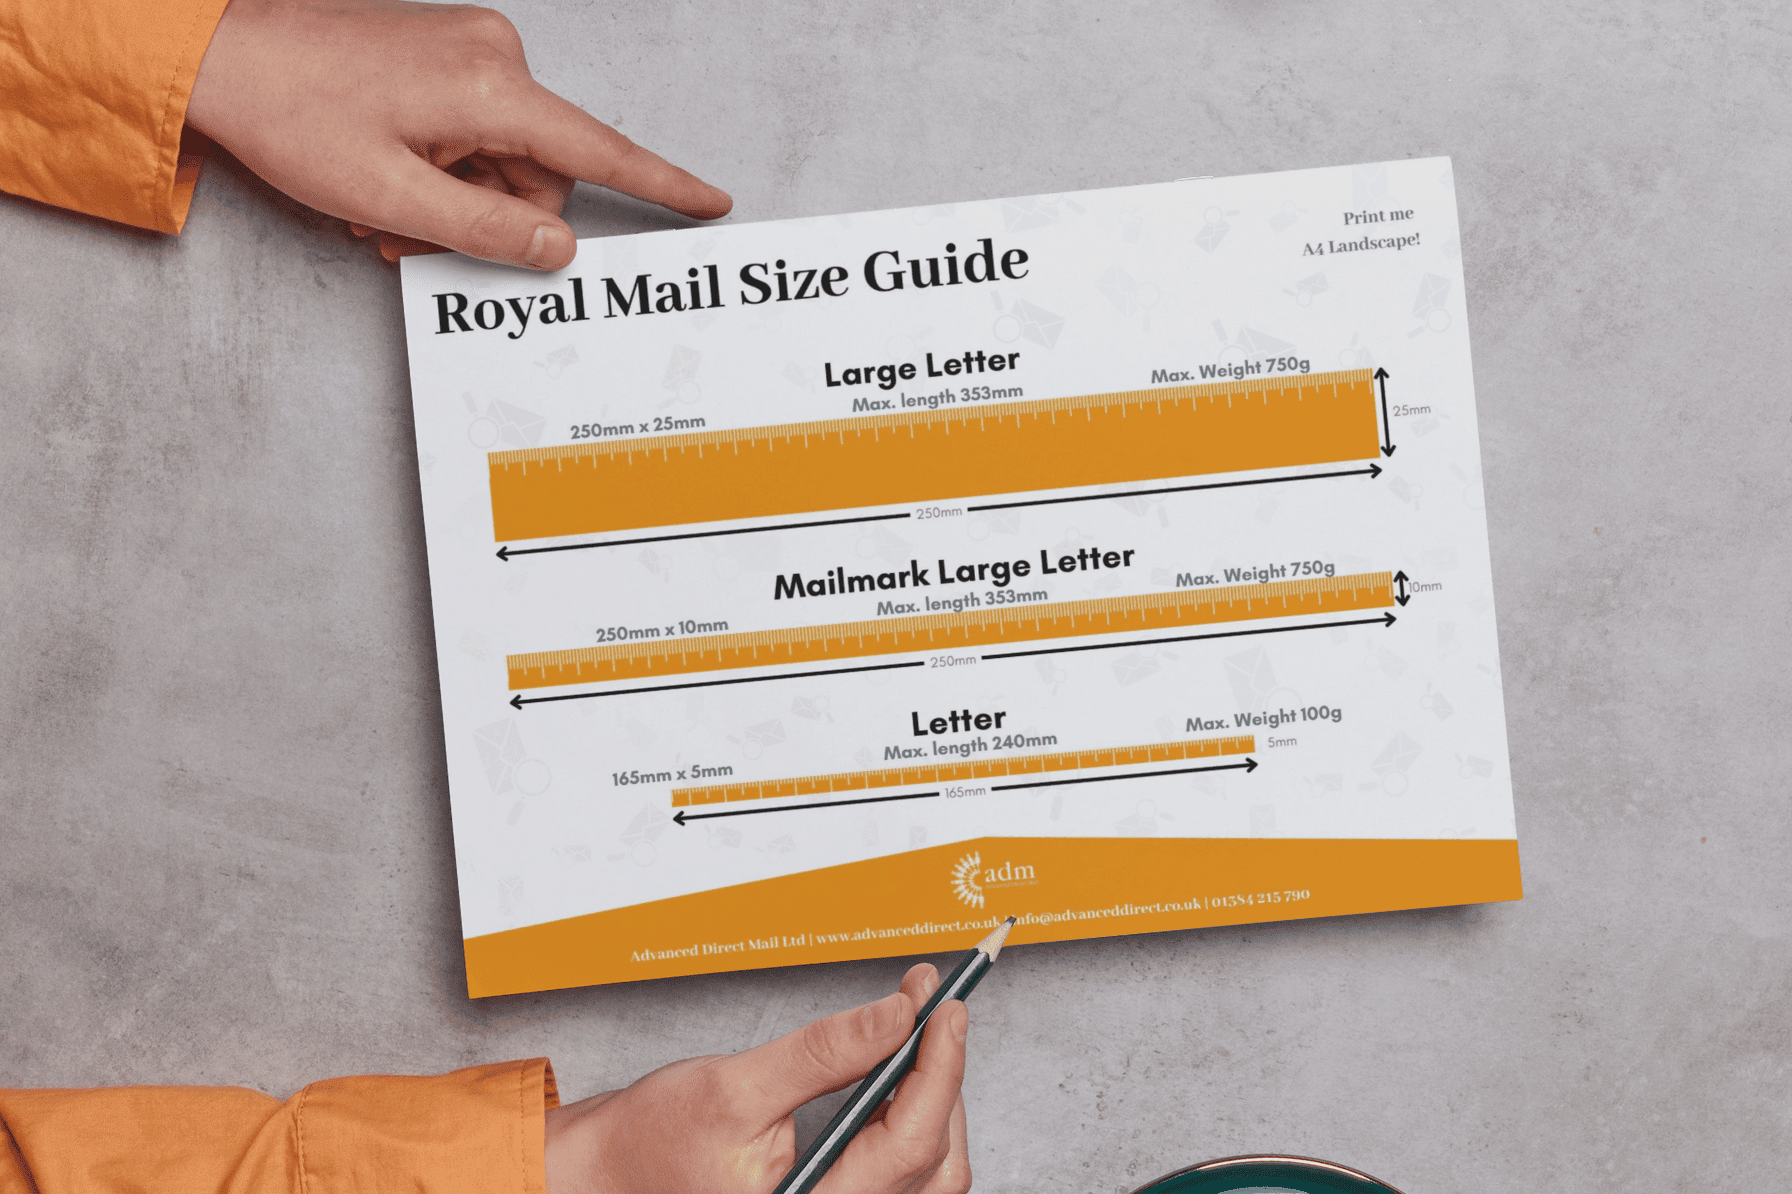 Royal Mail Direct Mail Size Guide